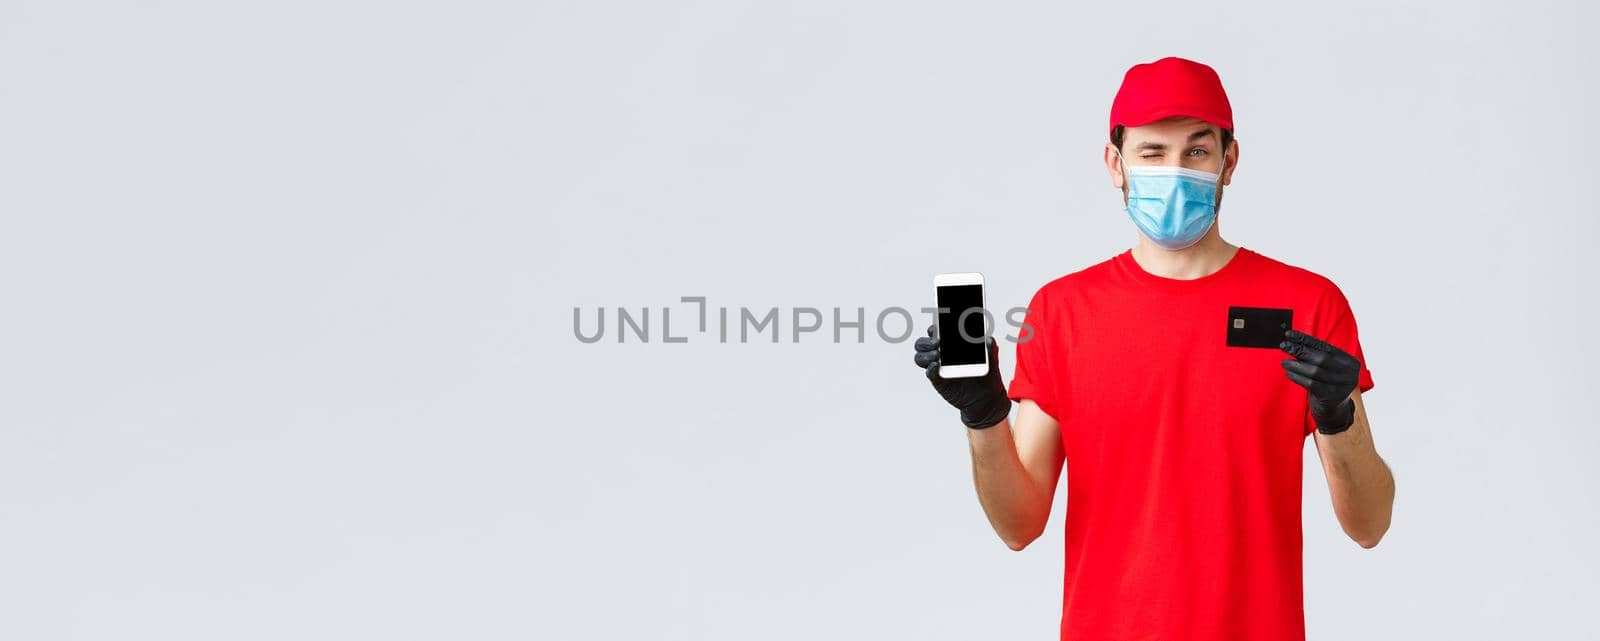 Contactless delivery, payment, online shopping during covid-19, self-quarantine. Handsome courier in red uniform, gloves and face mask, showing smartphone screen and credit card, promo of order app by Benzoix